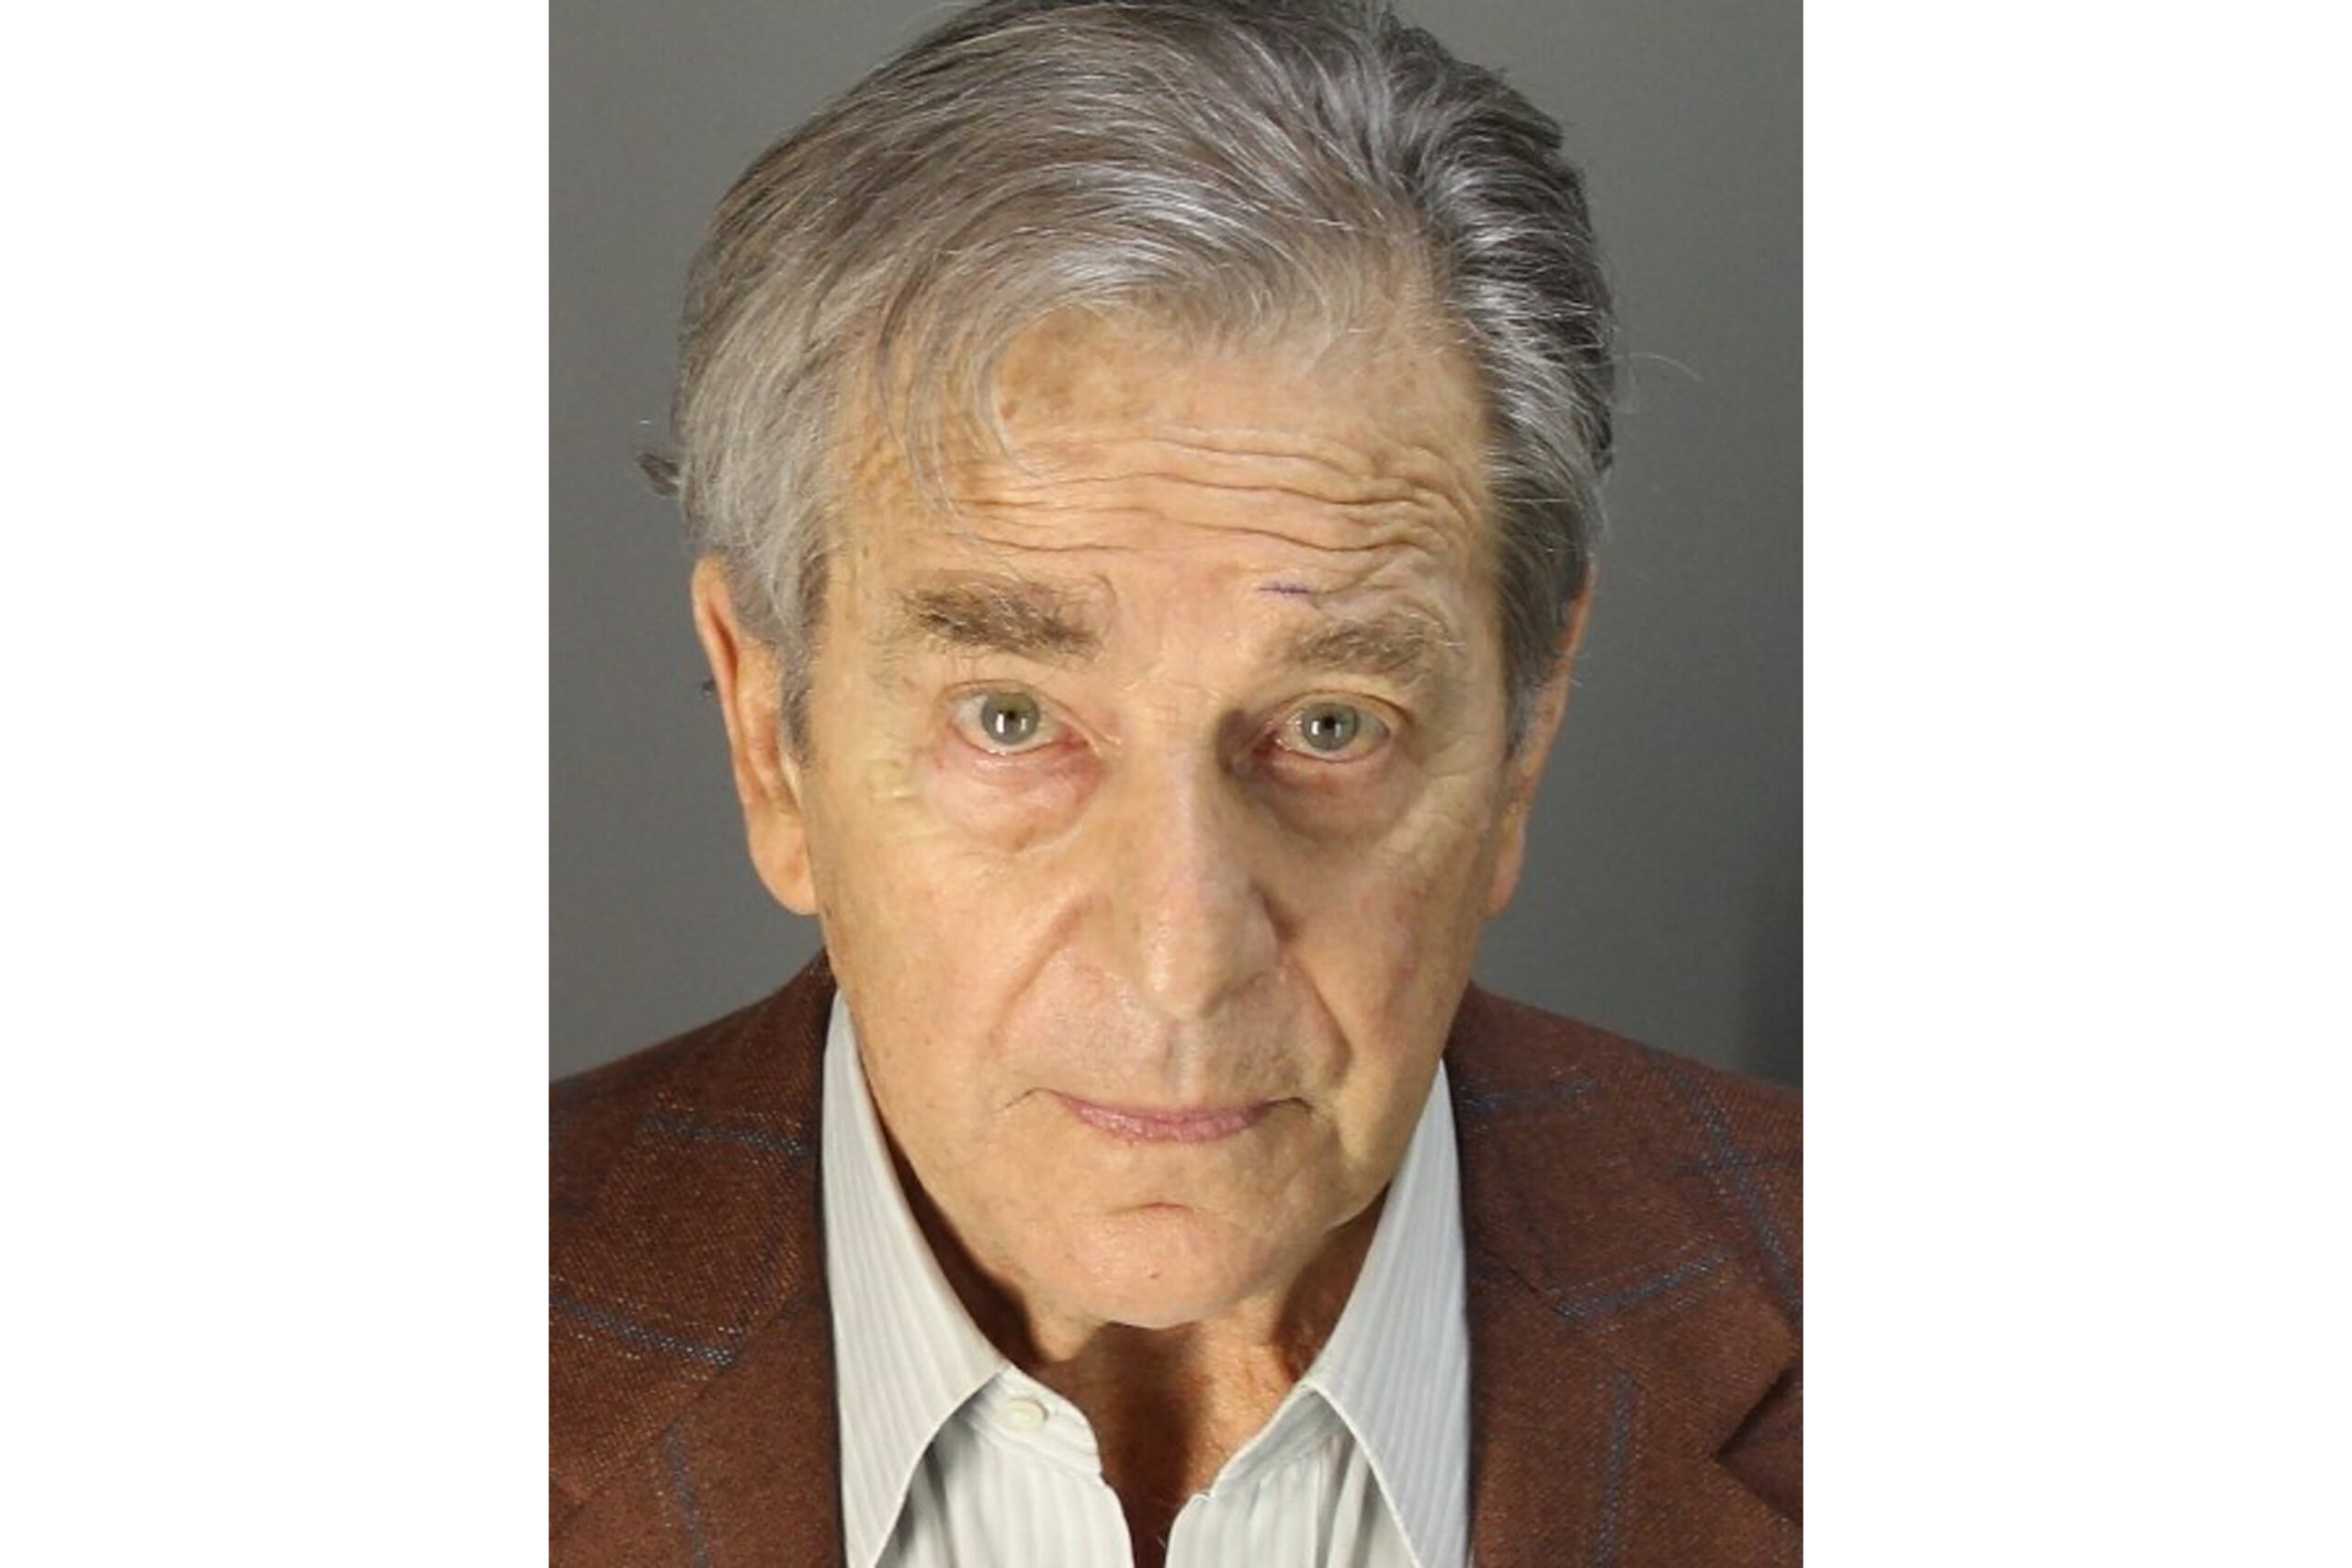 FILE - This booking photo provided by the Napa County Sheriff's Office shows Paul Pelosi on May 29, 2022, following his arrest on suspicion of DUI in Northern California. The husband of U.S. House Speaker Nancy Pelosi pleaded guilty Tuesday, Aug. 23, 2022, to misdemeanor driving under the influence charges related to a May crash in California's wine country and was sentenced to five days in jail and three years' probation. Paul Pelosi already served two days in jail and received conduct credit for two other days, Napa County Superior Court Judge Joseph Solga said. (Napa County Sheriff's Office via AP, File)